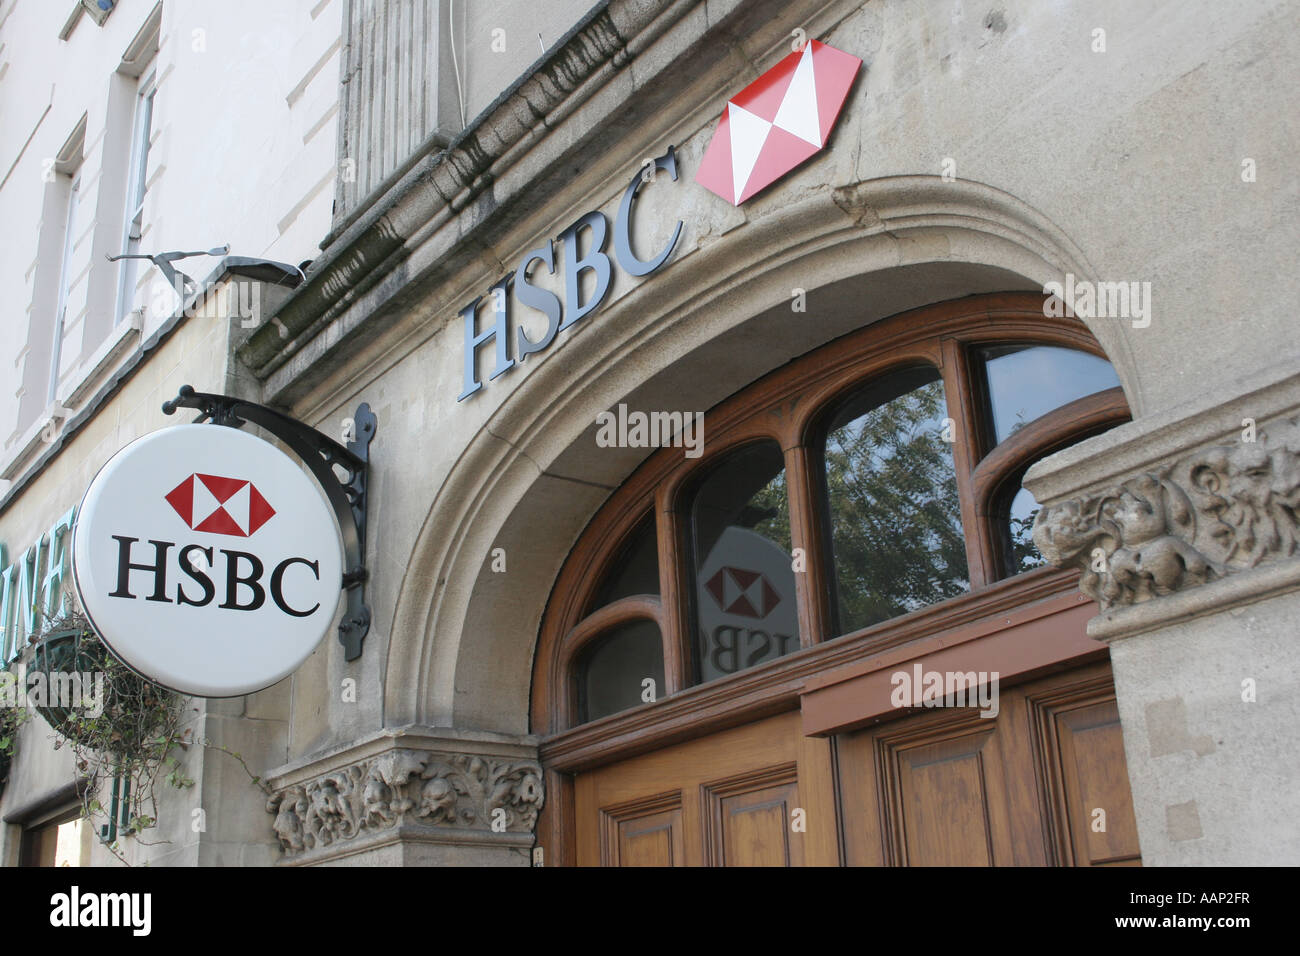 HSBC Bank in Chipping Norton England. Stock Photo